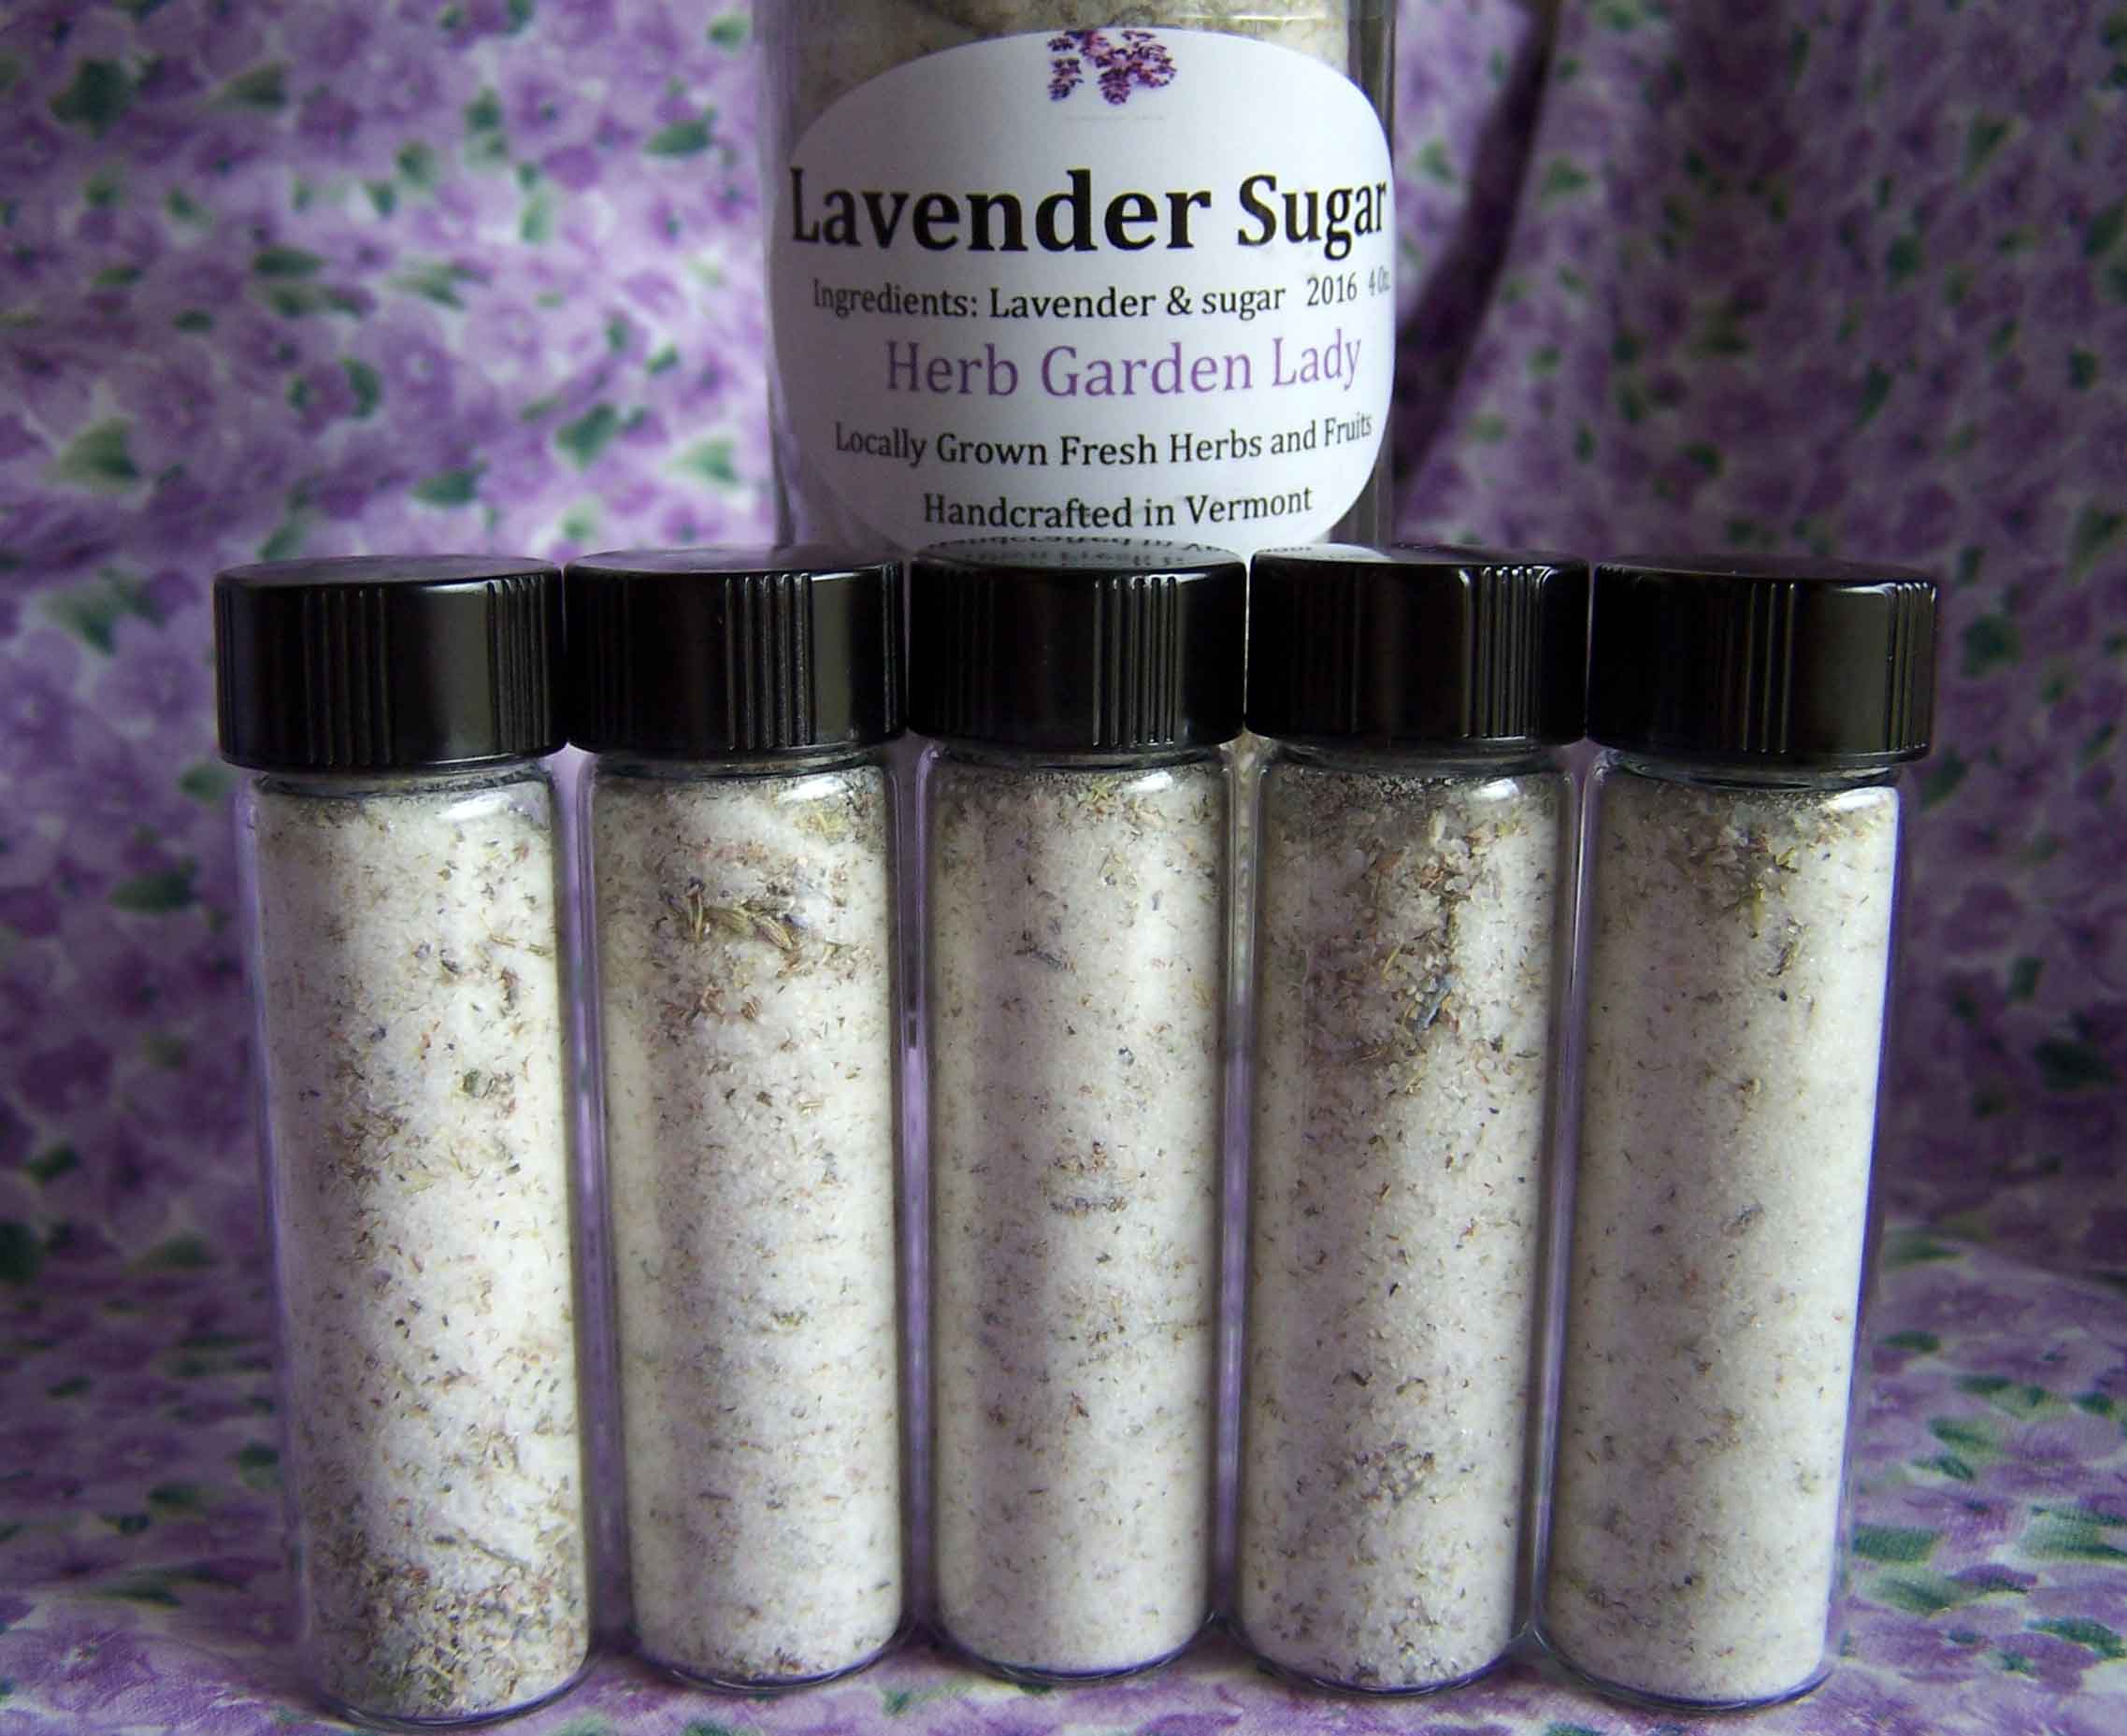 Lavender sugar in small vials ready to use.